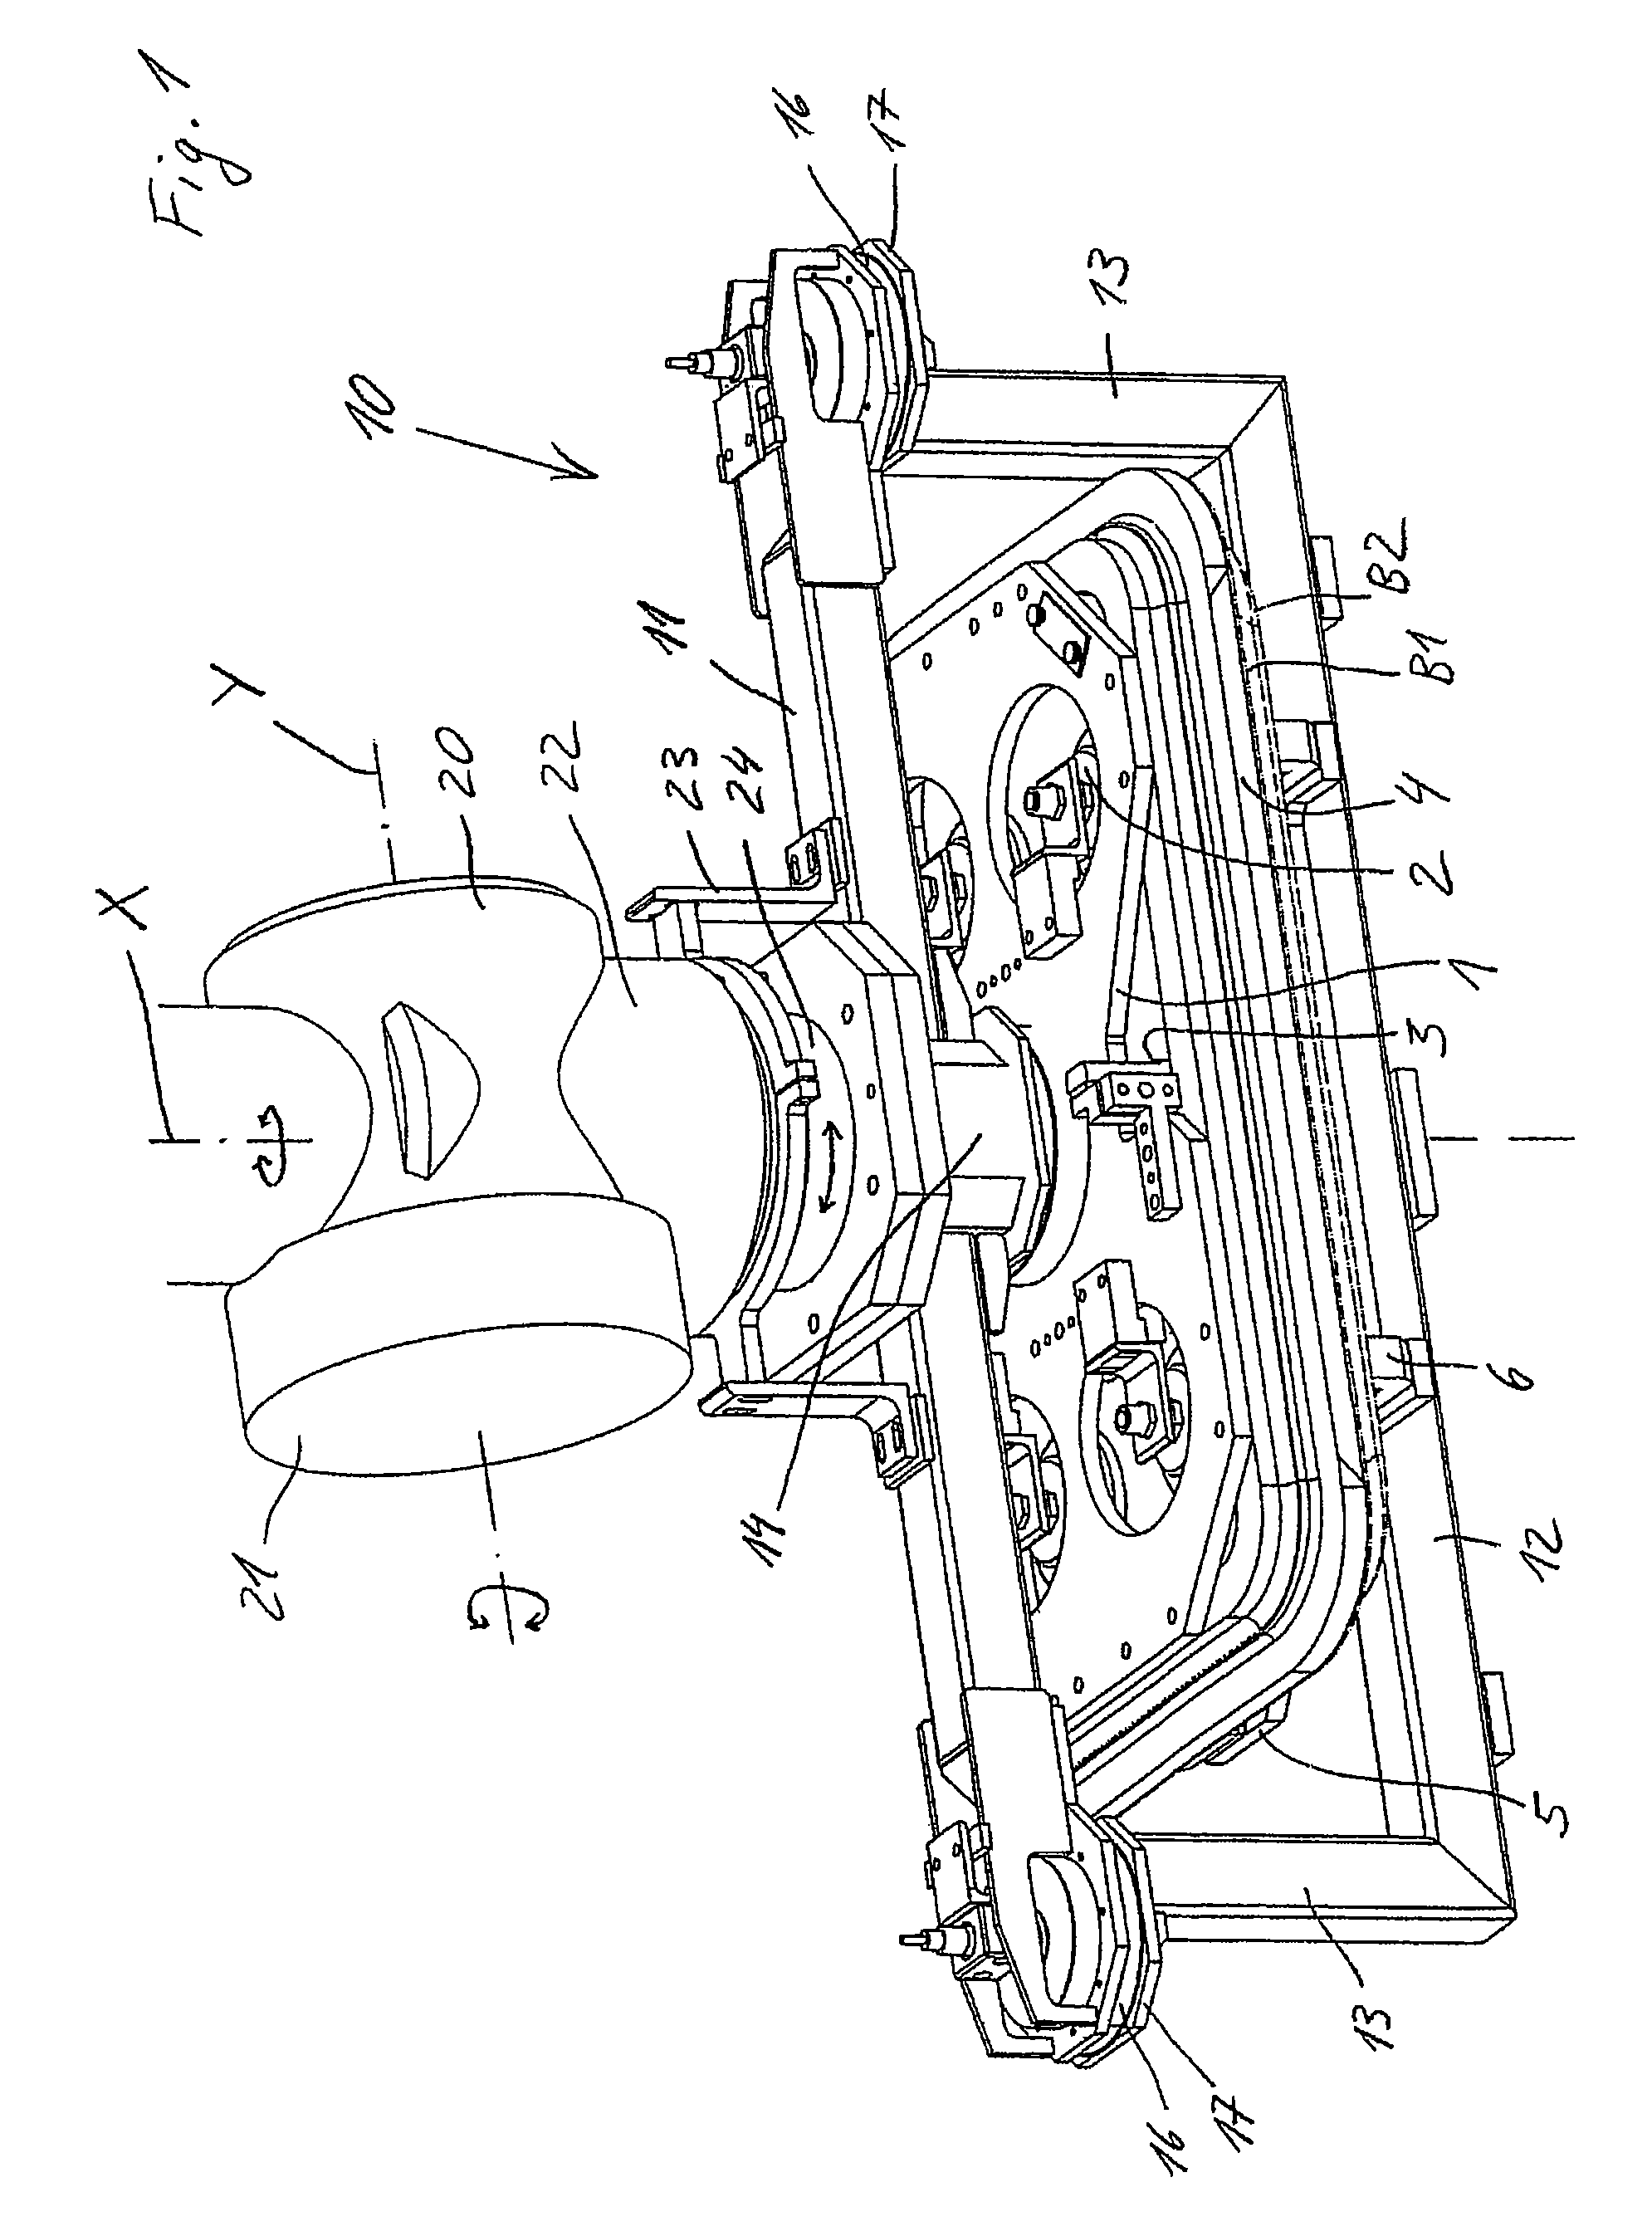 Clamping device for holding and clamping components